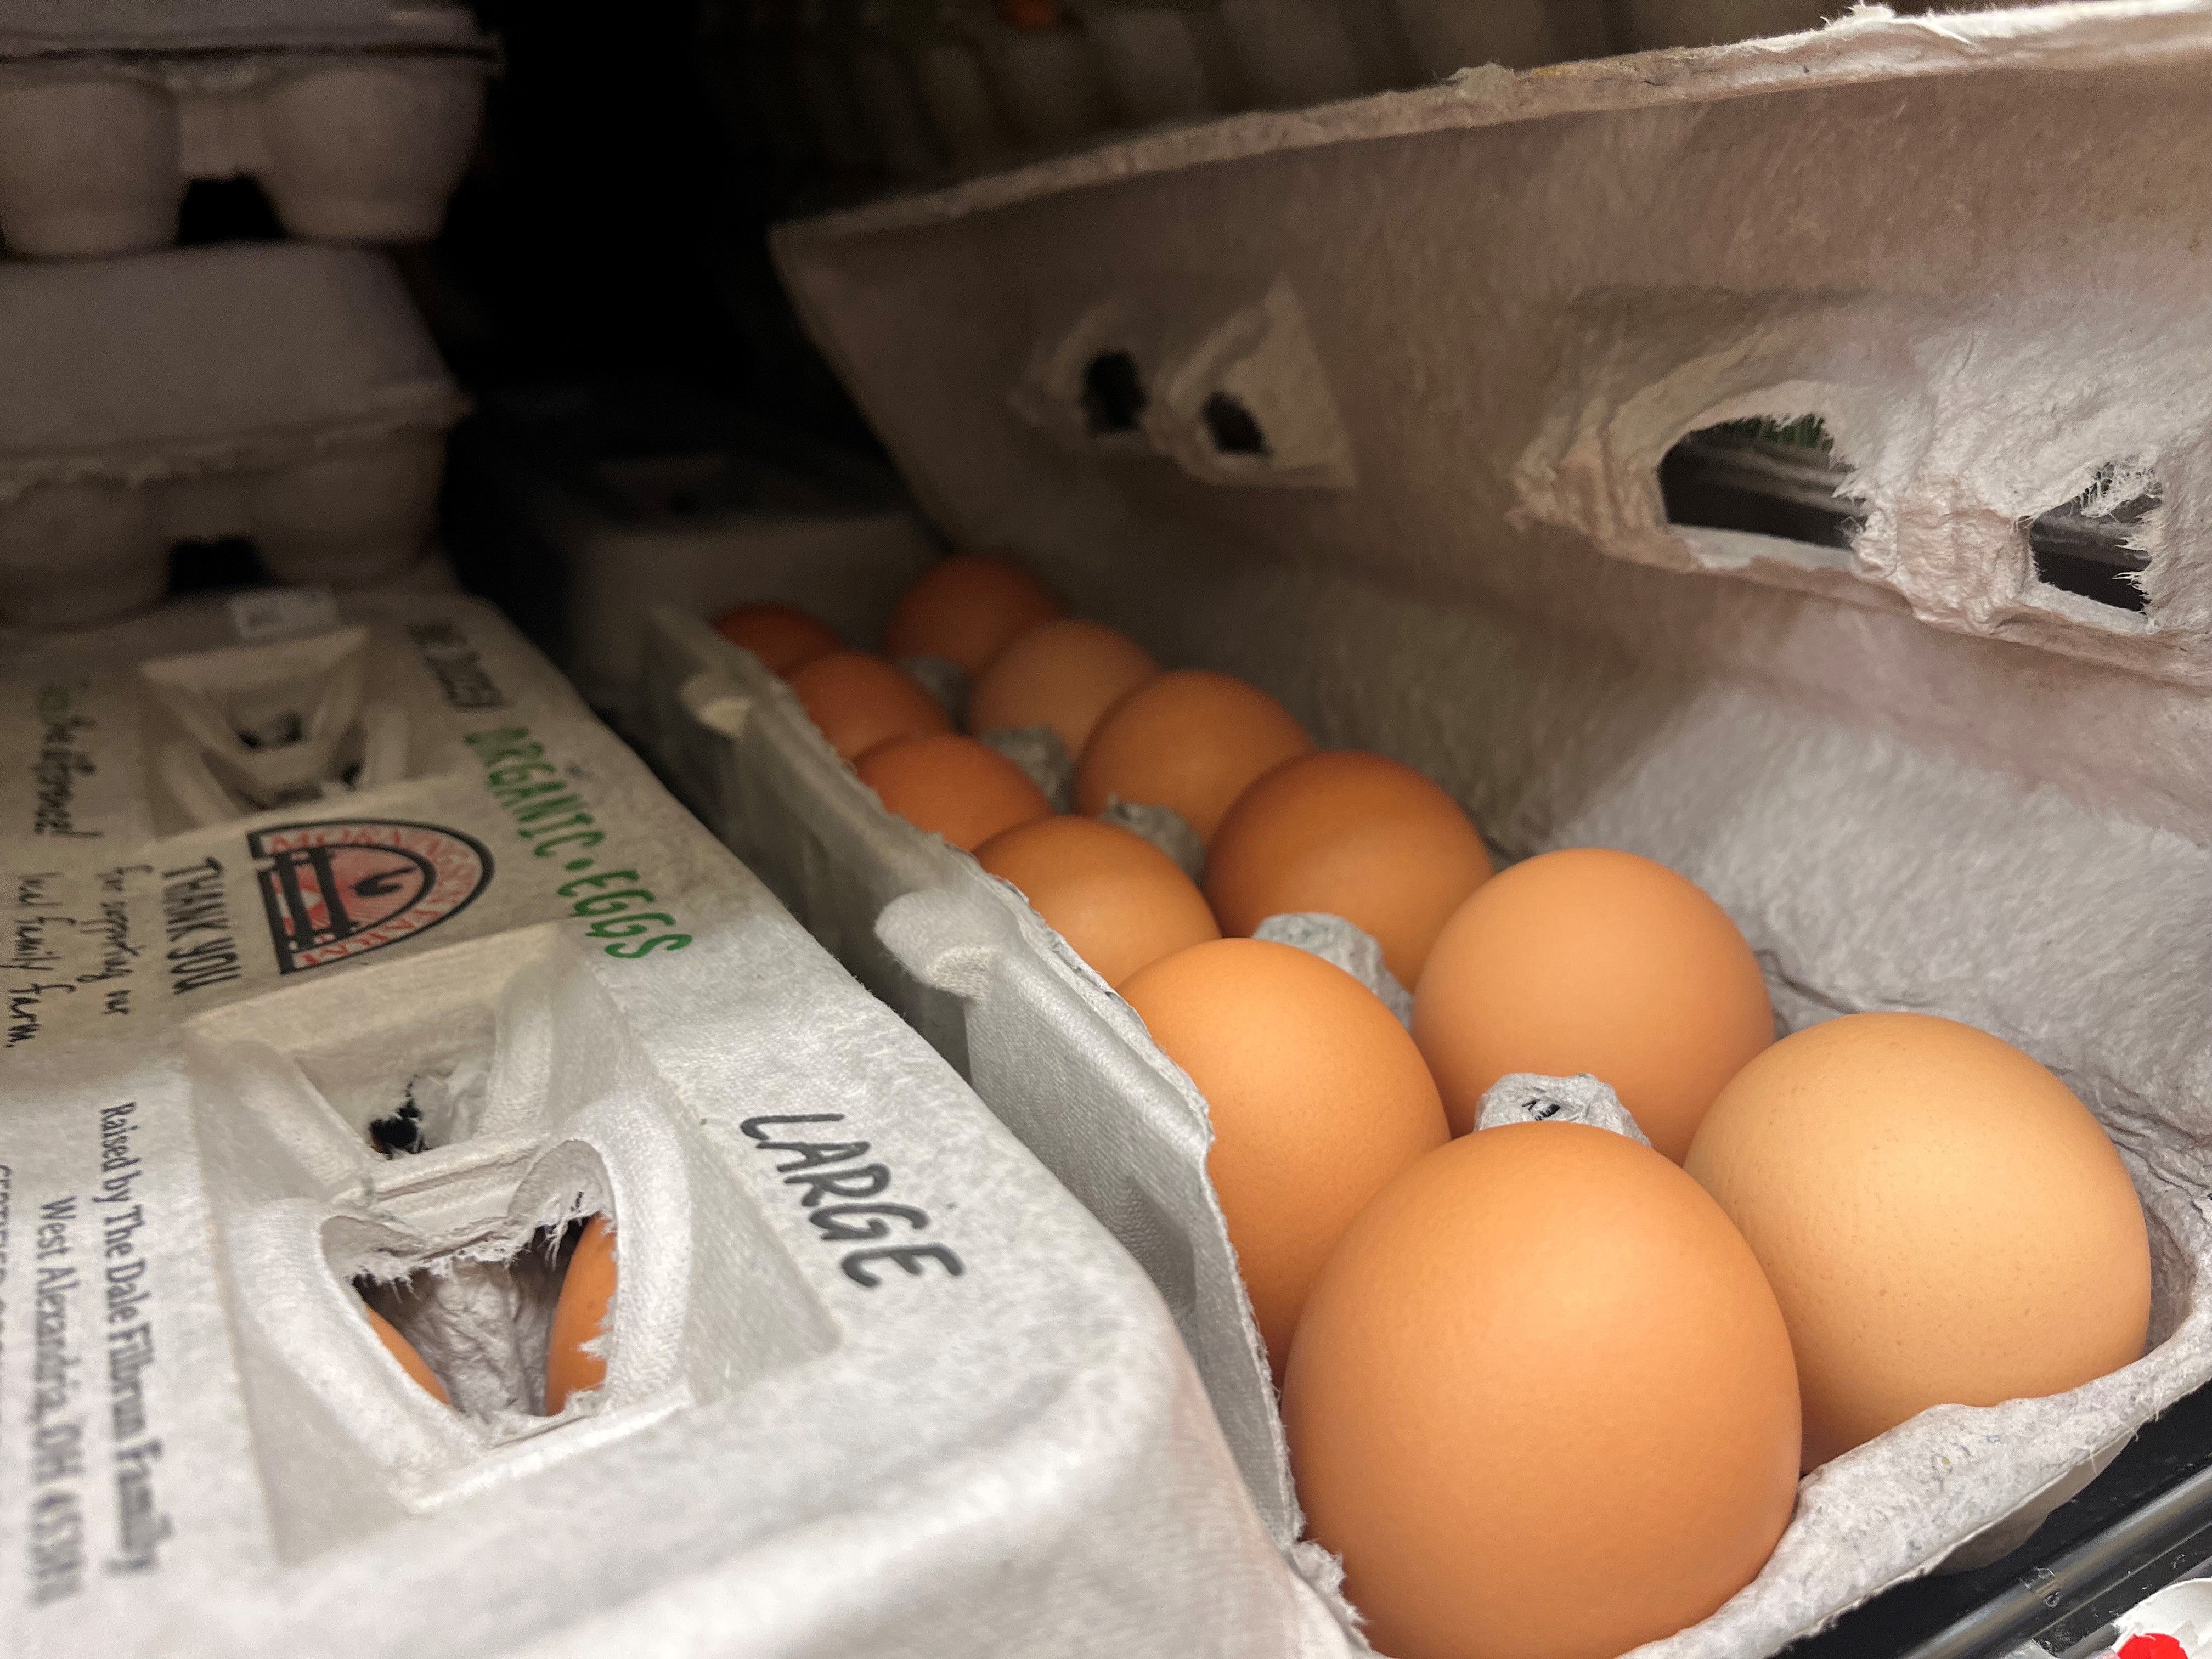 Egg prices are up in the Dayton area, according to a new survey of the prices of goods and services in 260 US metropolitan areas.  Cornelius Frolik / Crew